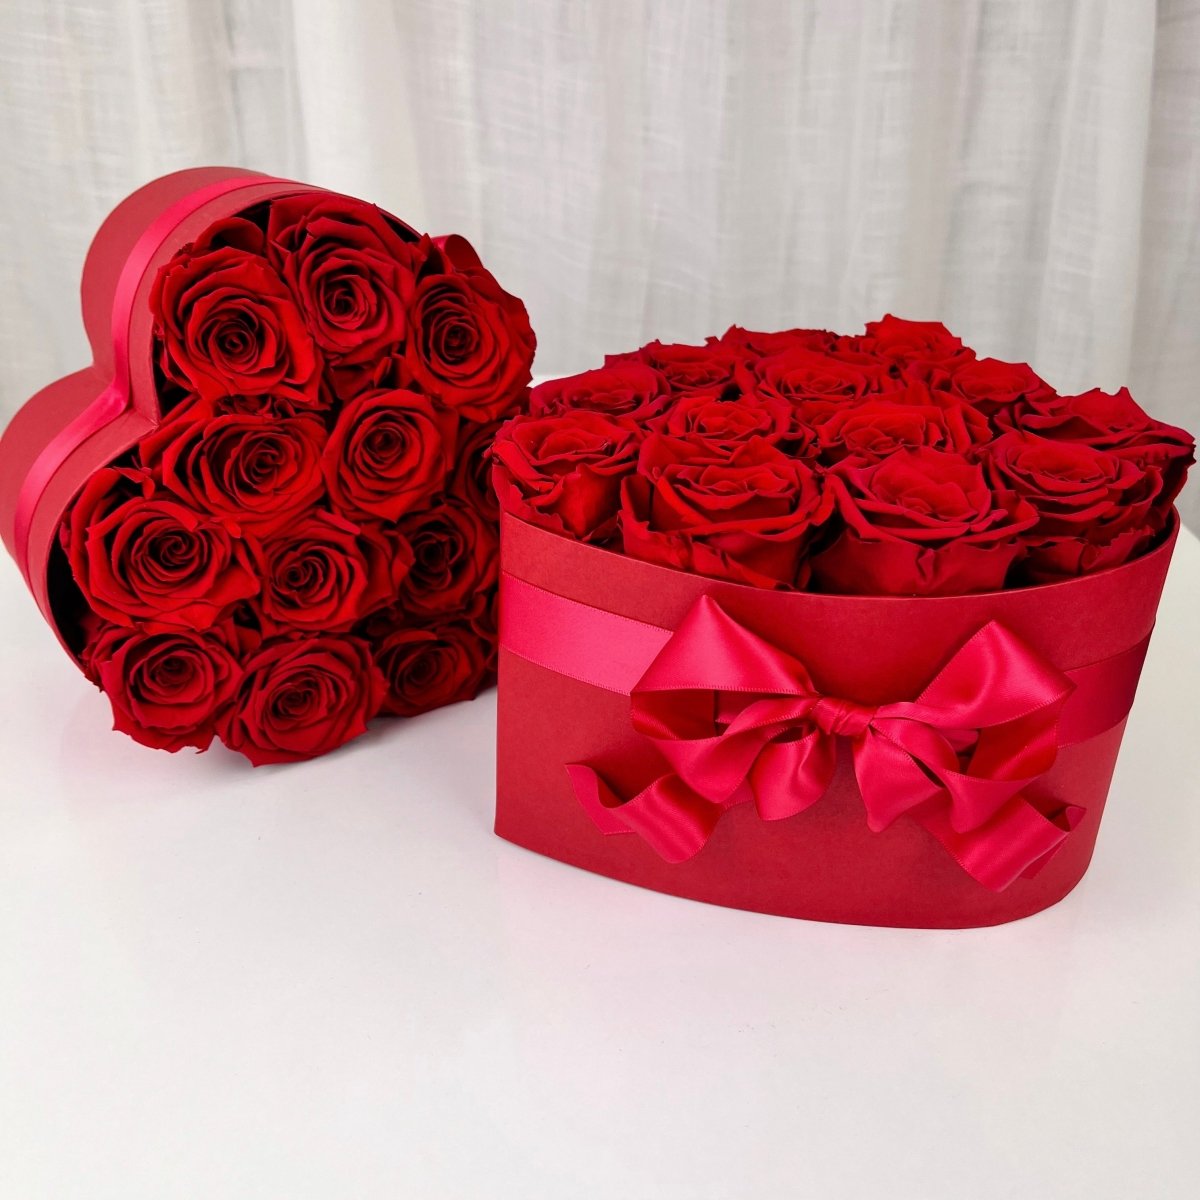 Infinity Rose Heart Box - Red Infinity Roses - One Year Roses - Romantic Gift - Rose Colours divider-Ruby Red